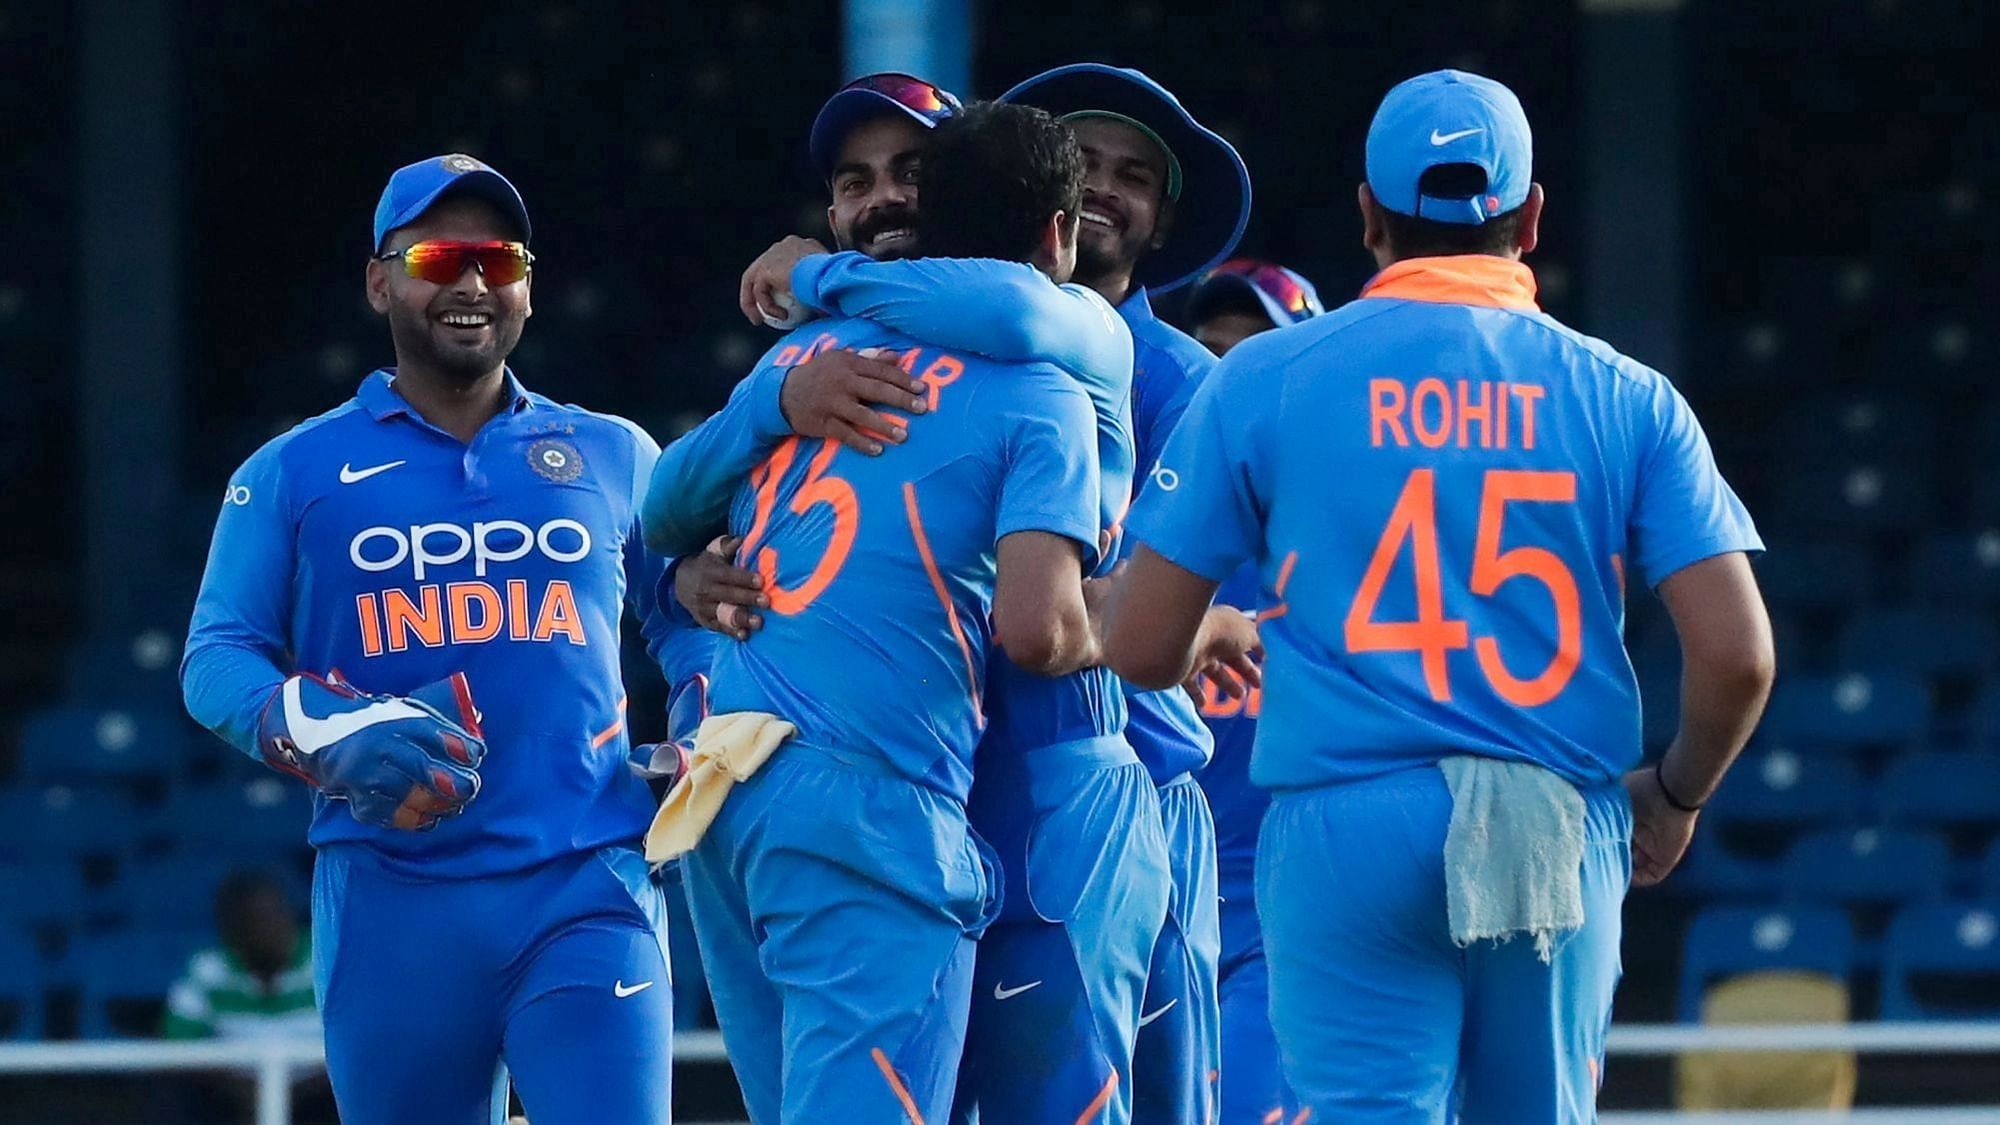 India vs New Zealand Live Streaming Ind vs NZ Live Telecast on TV Channel, New Zealand Tour of India ODI Series Date, Time, Venue